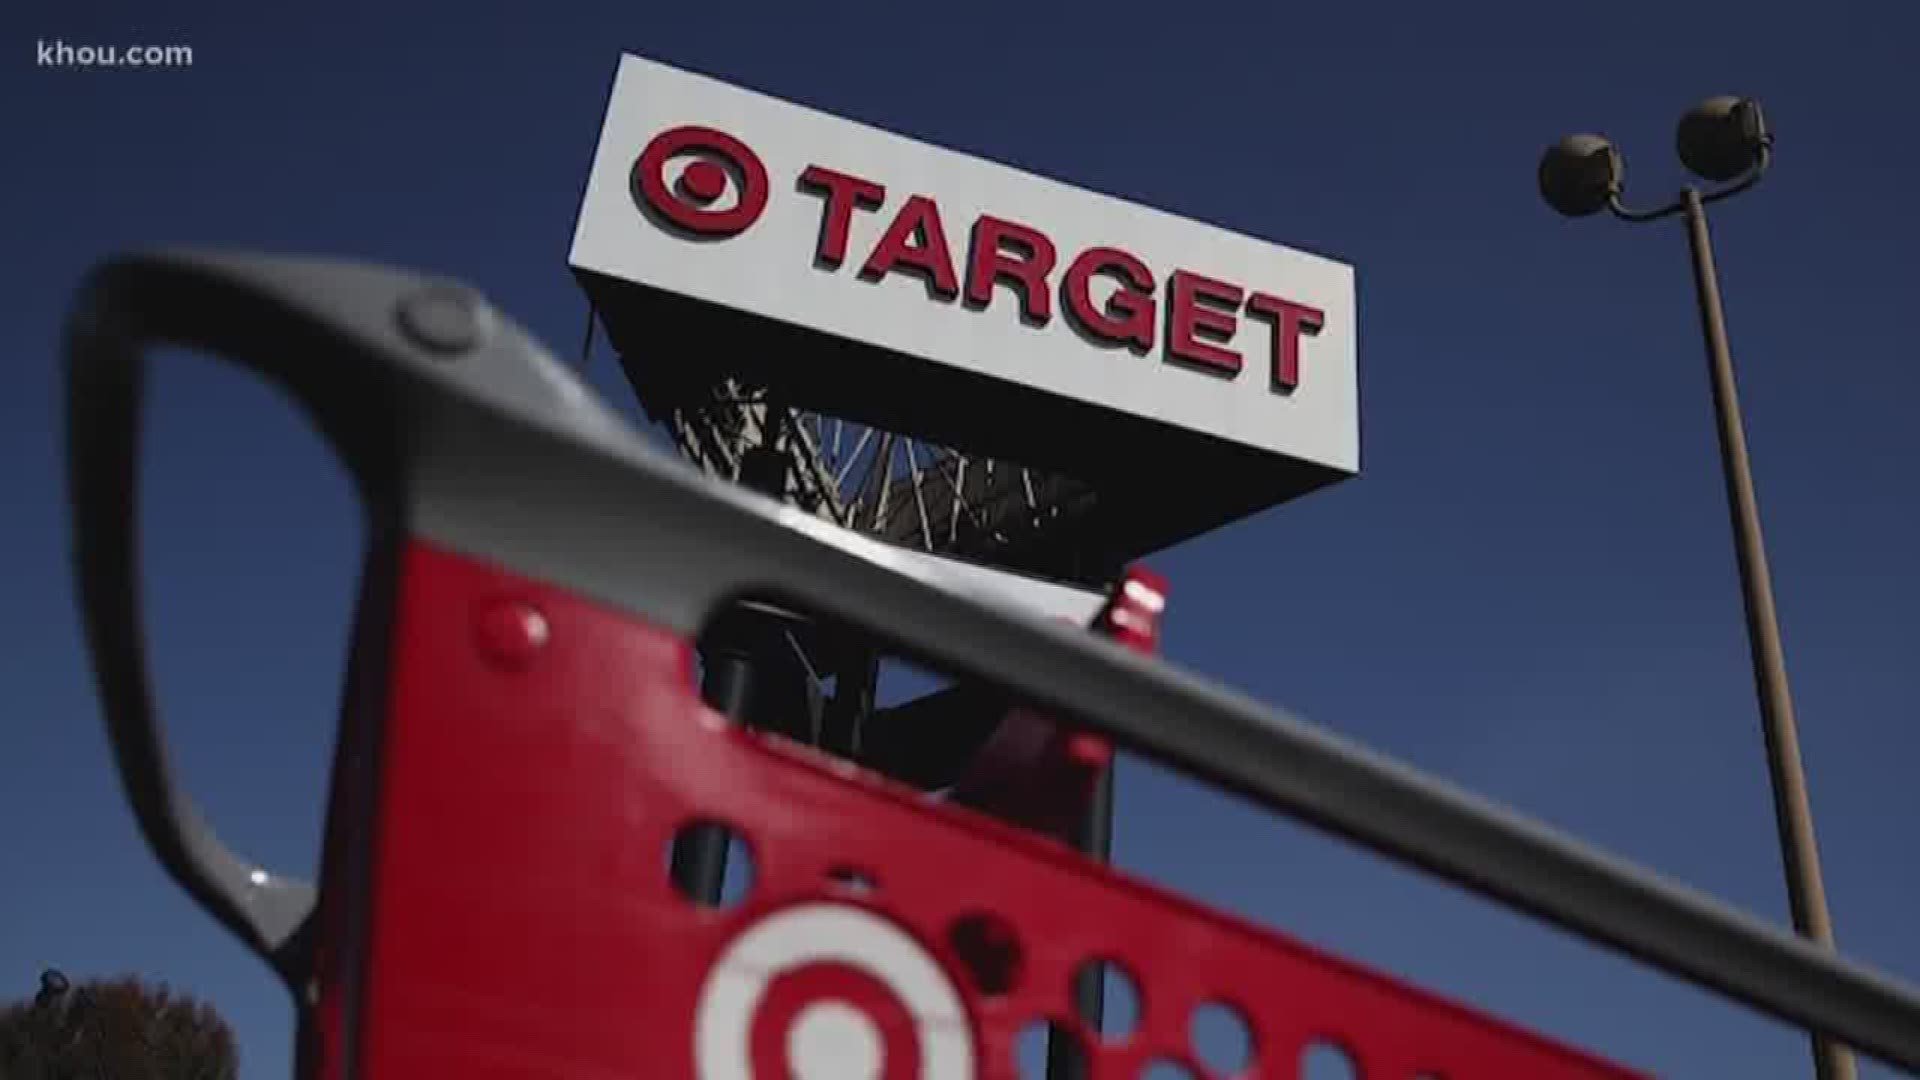 A woman was mugged, kicked and beaten outside a Target store in southwest Houston. Police confirm she was attacked in the 8500 block of Main Street on Thursday night.